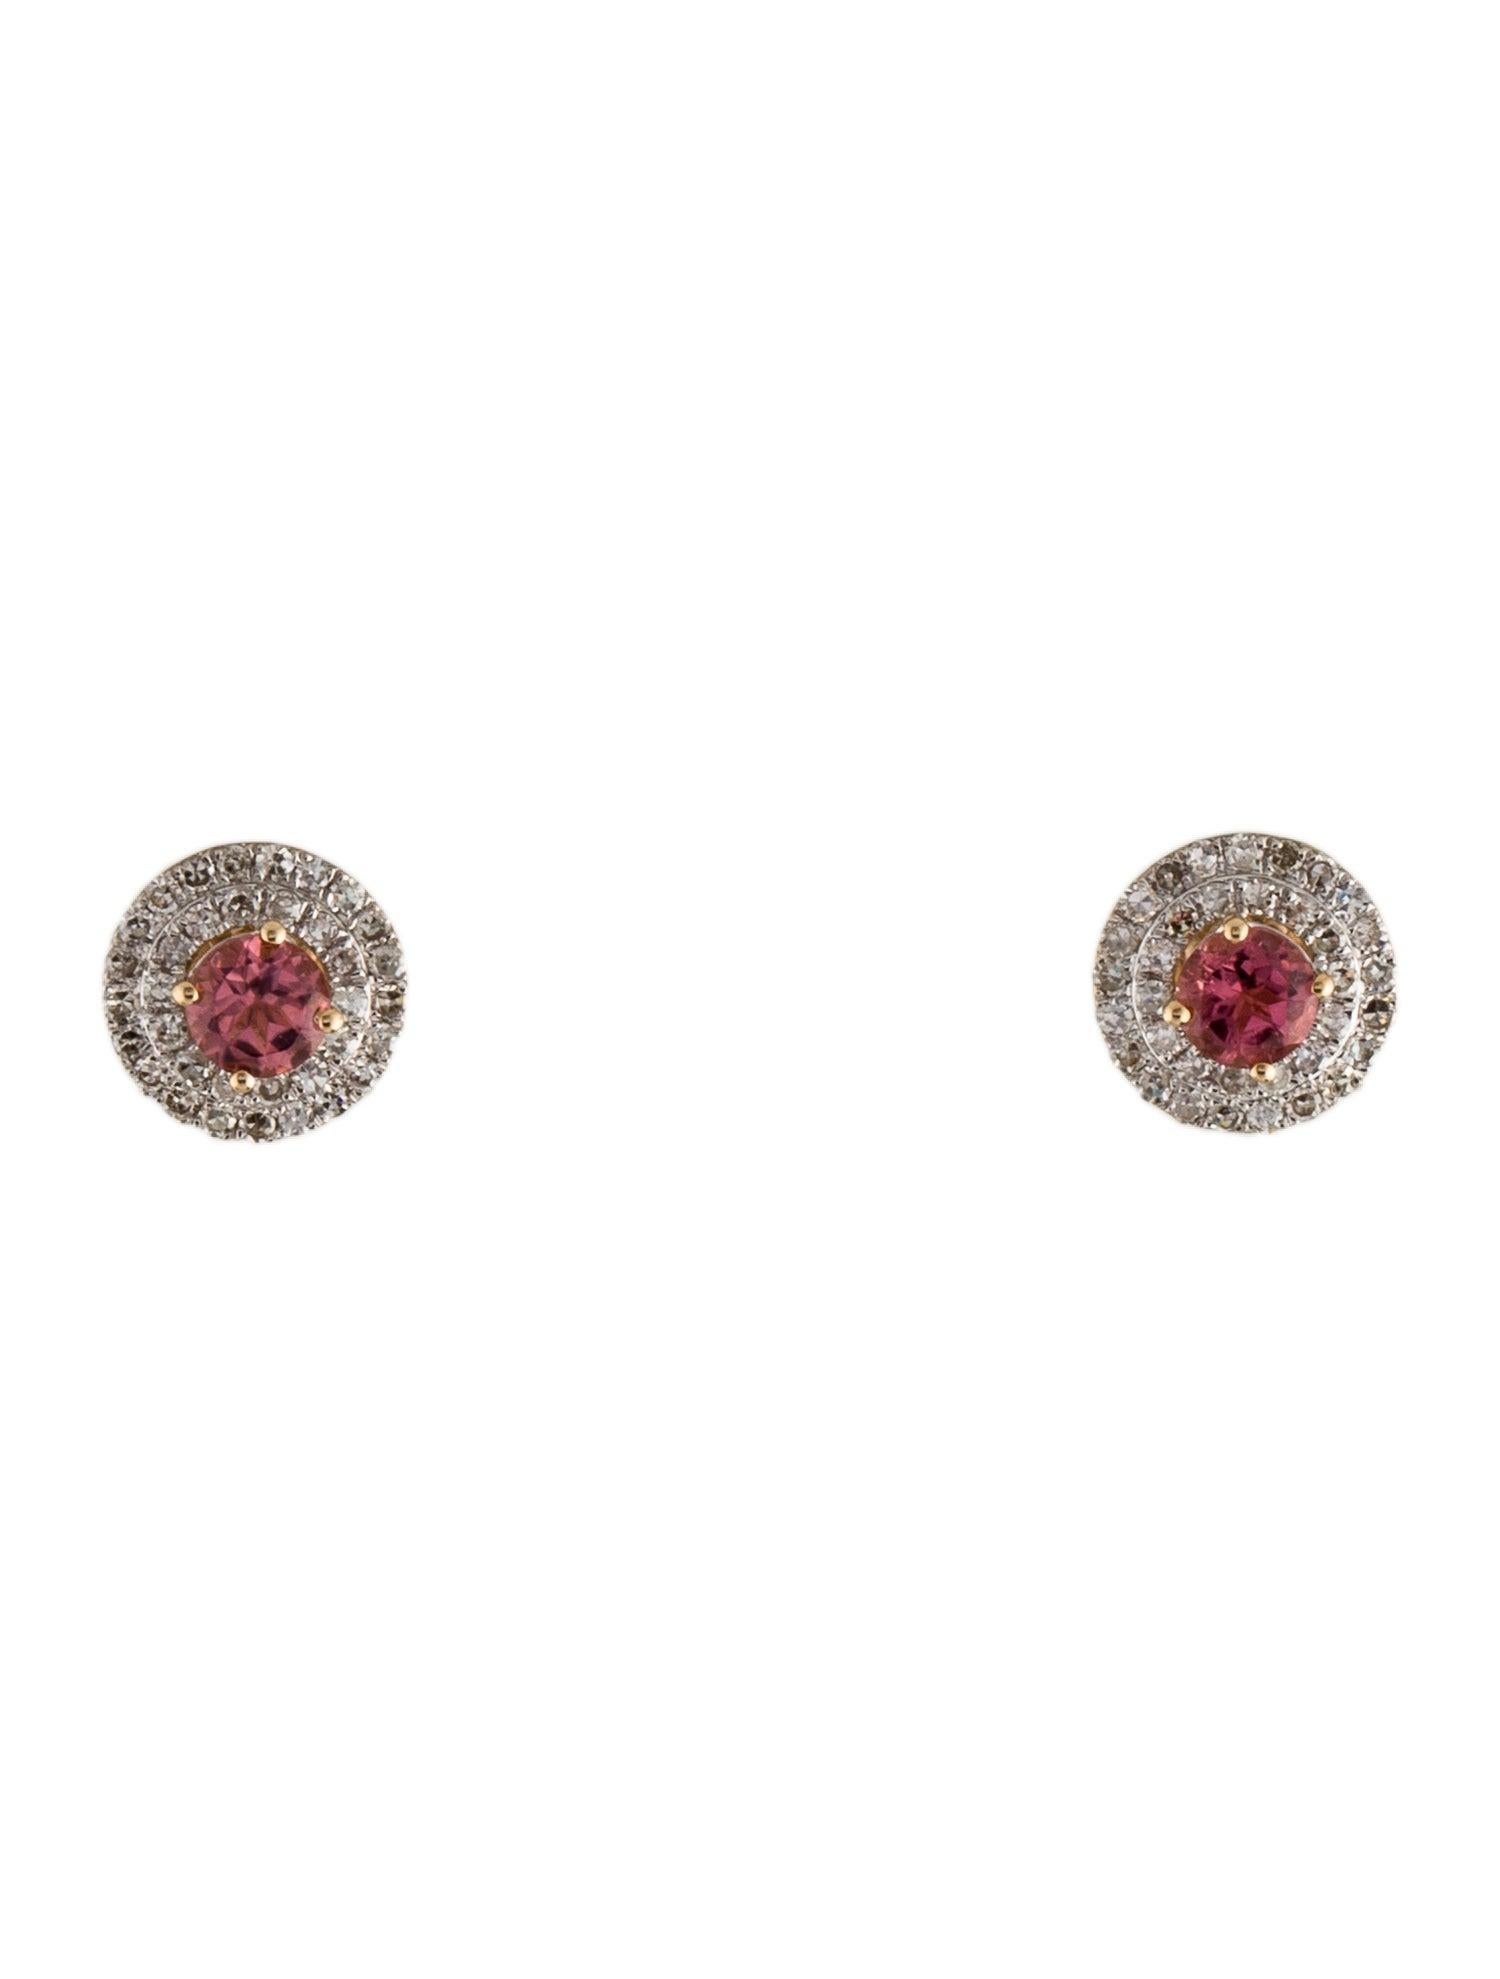 14K Tourmaline & Diamond Stud Earrings - Stunning Luxury Gemstone Jewelry In New Condition For Sale In Holtsville, NY